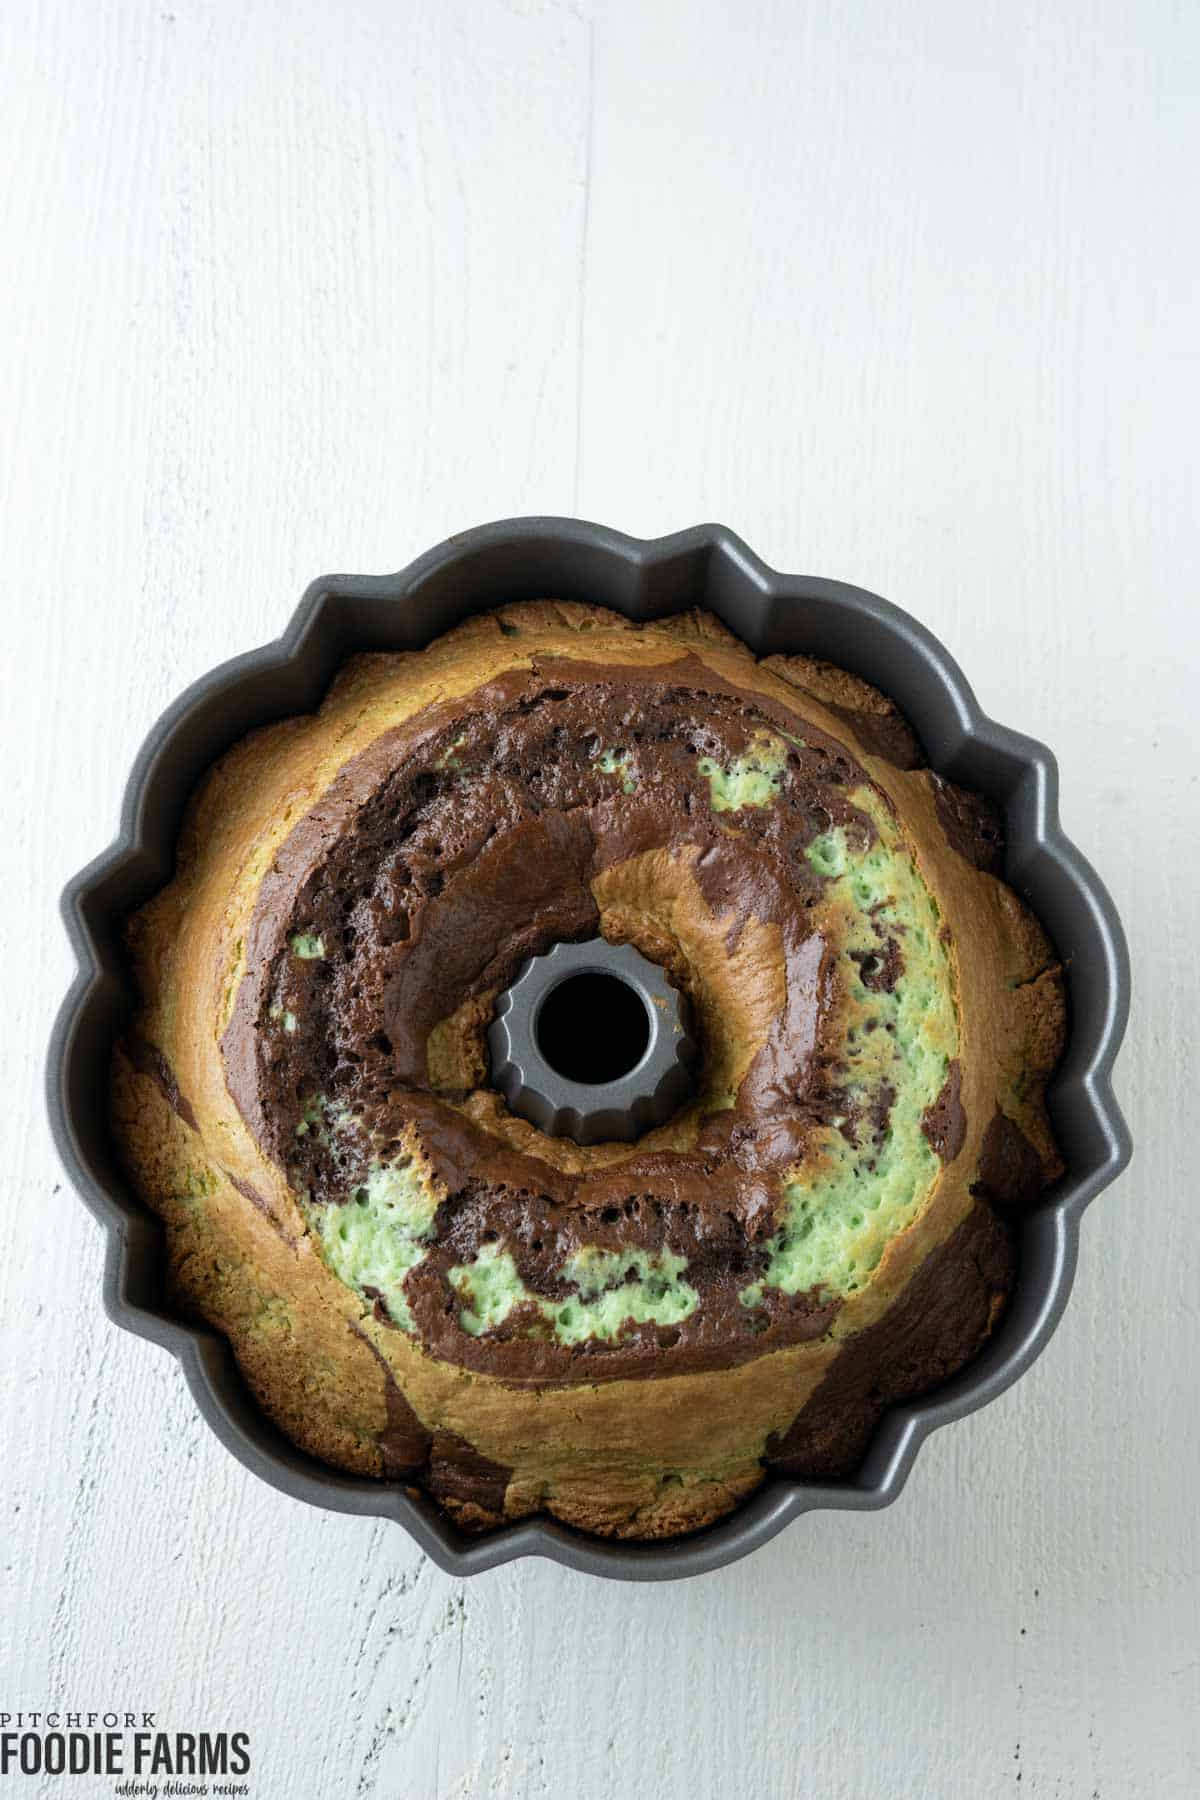 A swirled pistachio bundt cake with green and chocolate marble.